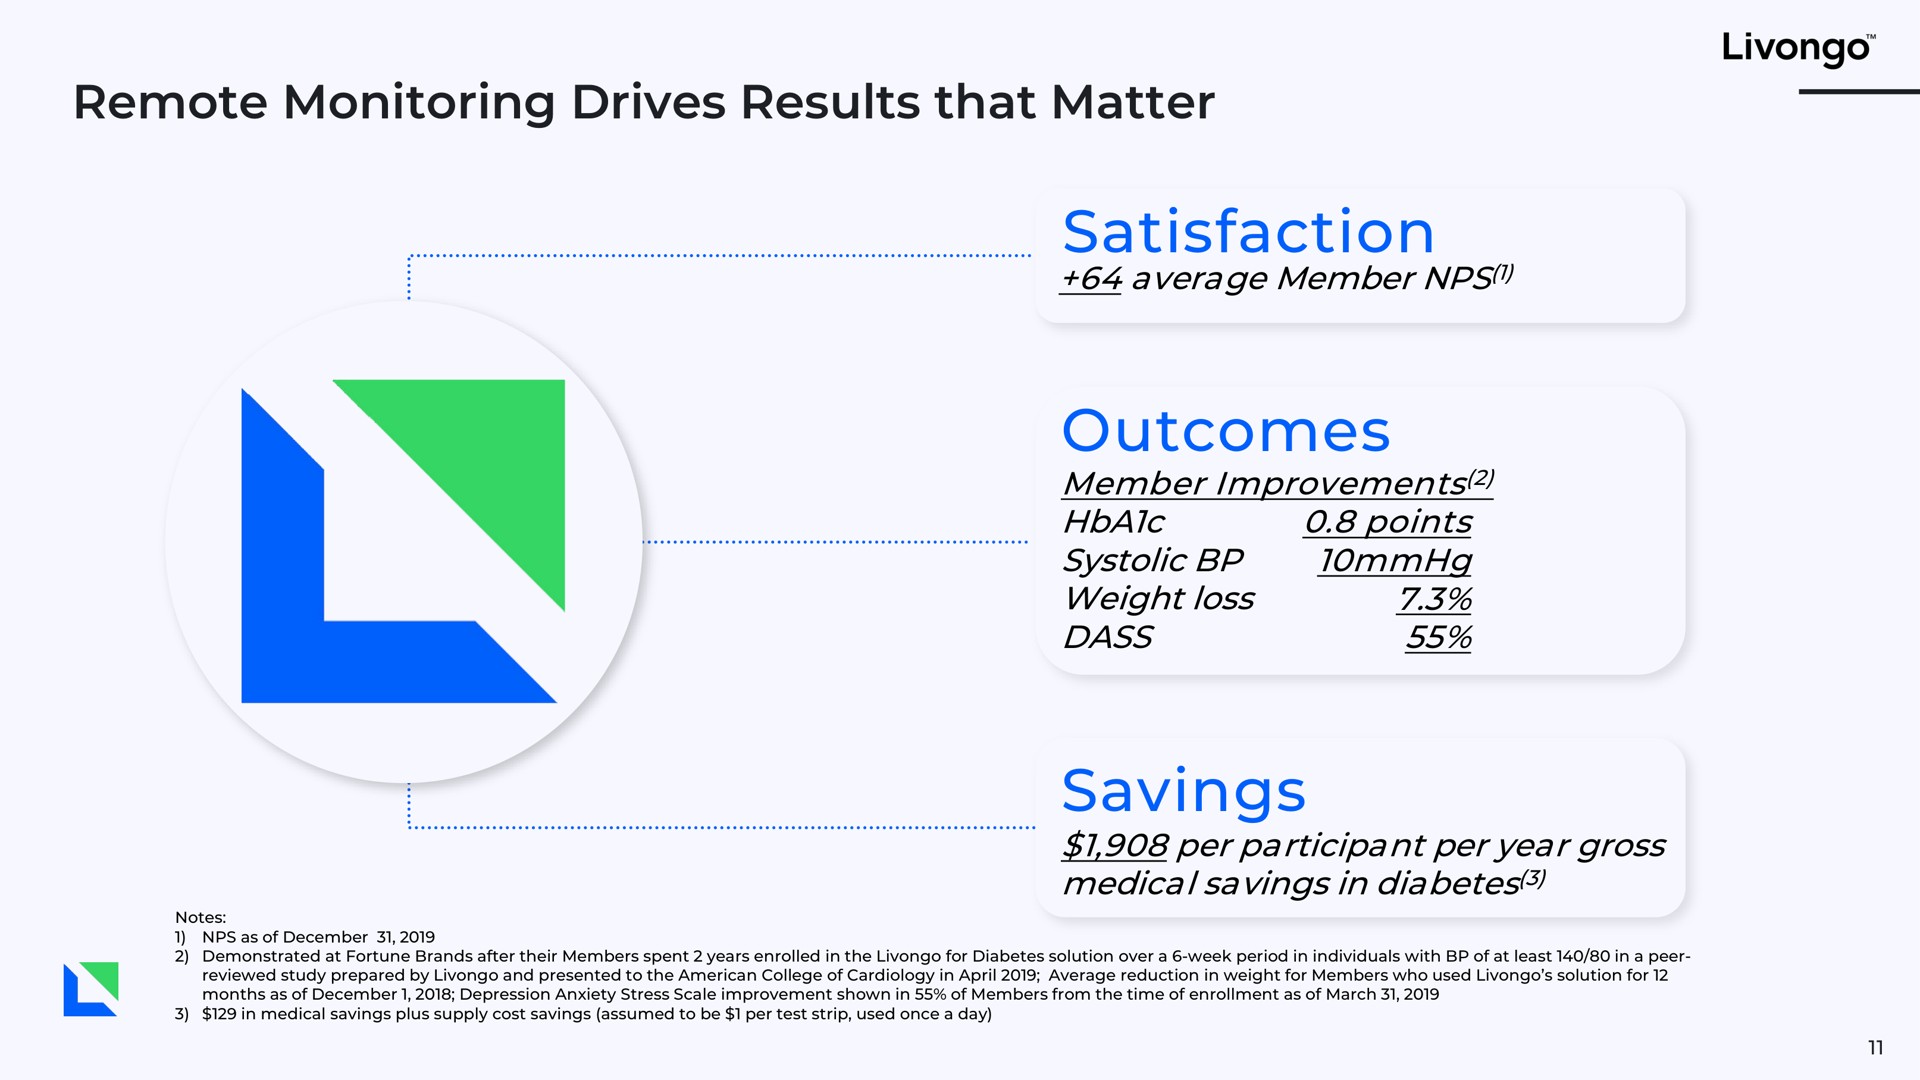 remote monitoring drives results that matter satisfaction outcomes savings | Livongo